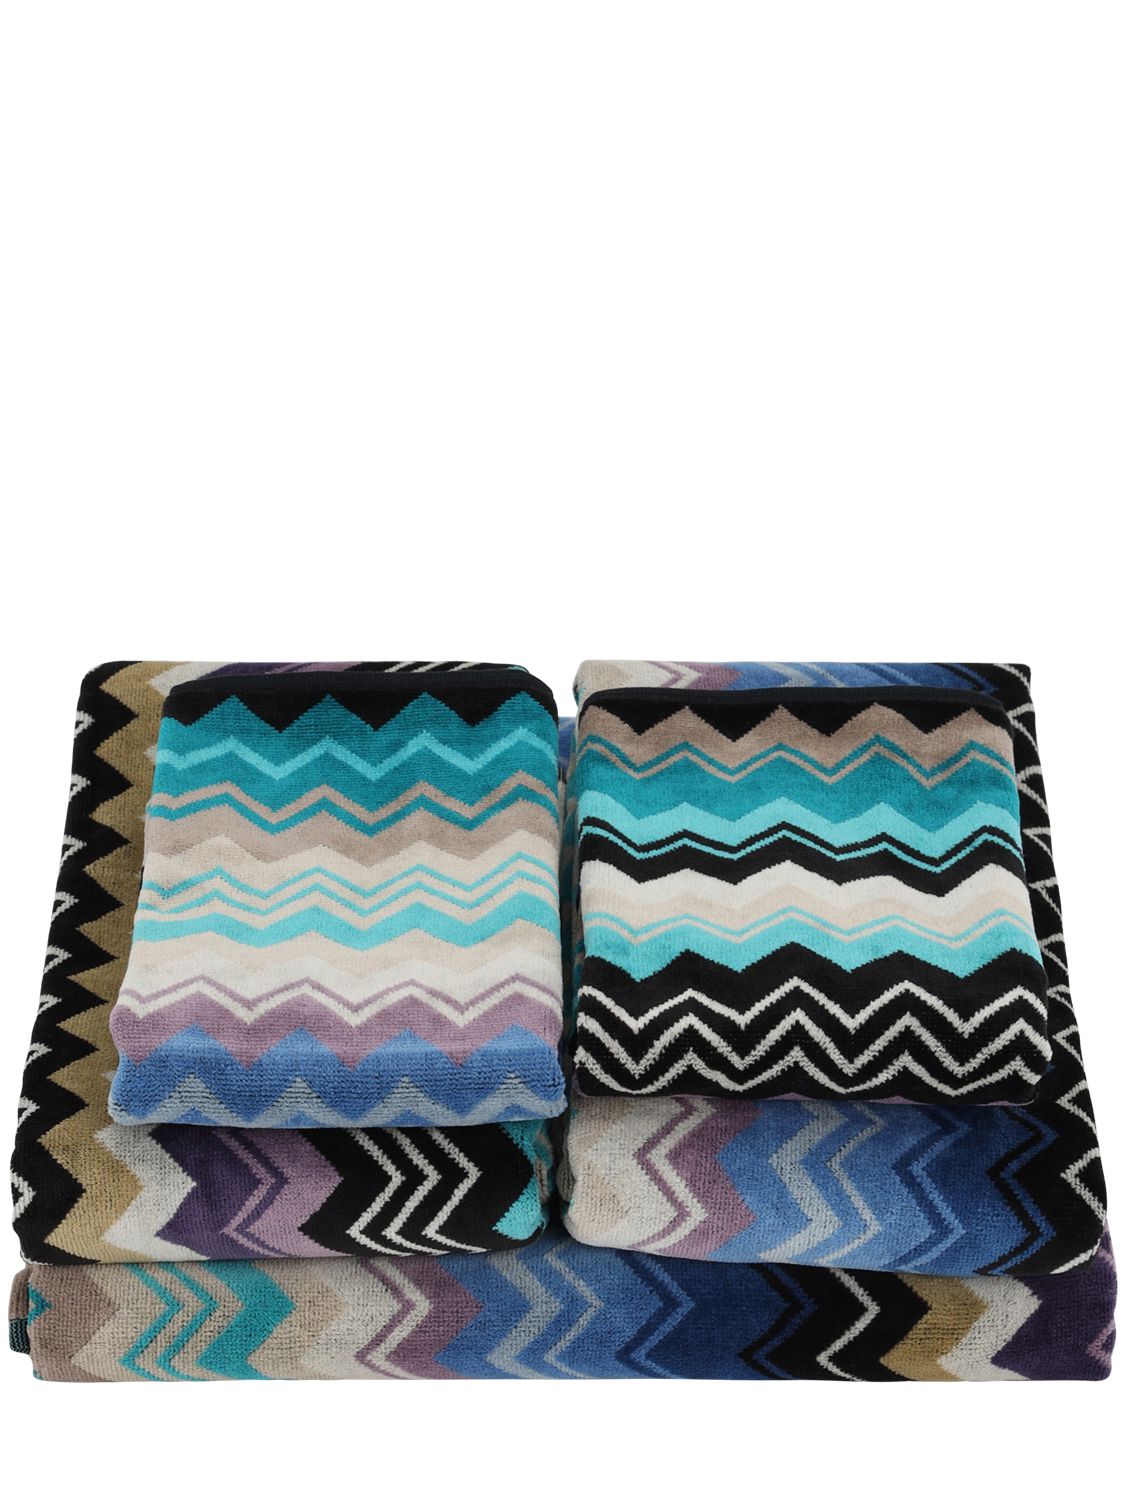 Missoni Set Of 5 Giacomo Cotton Towels In Blue